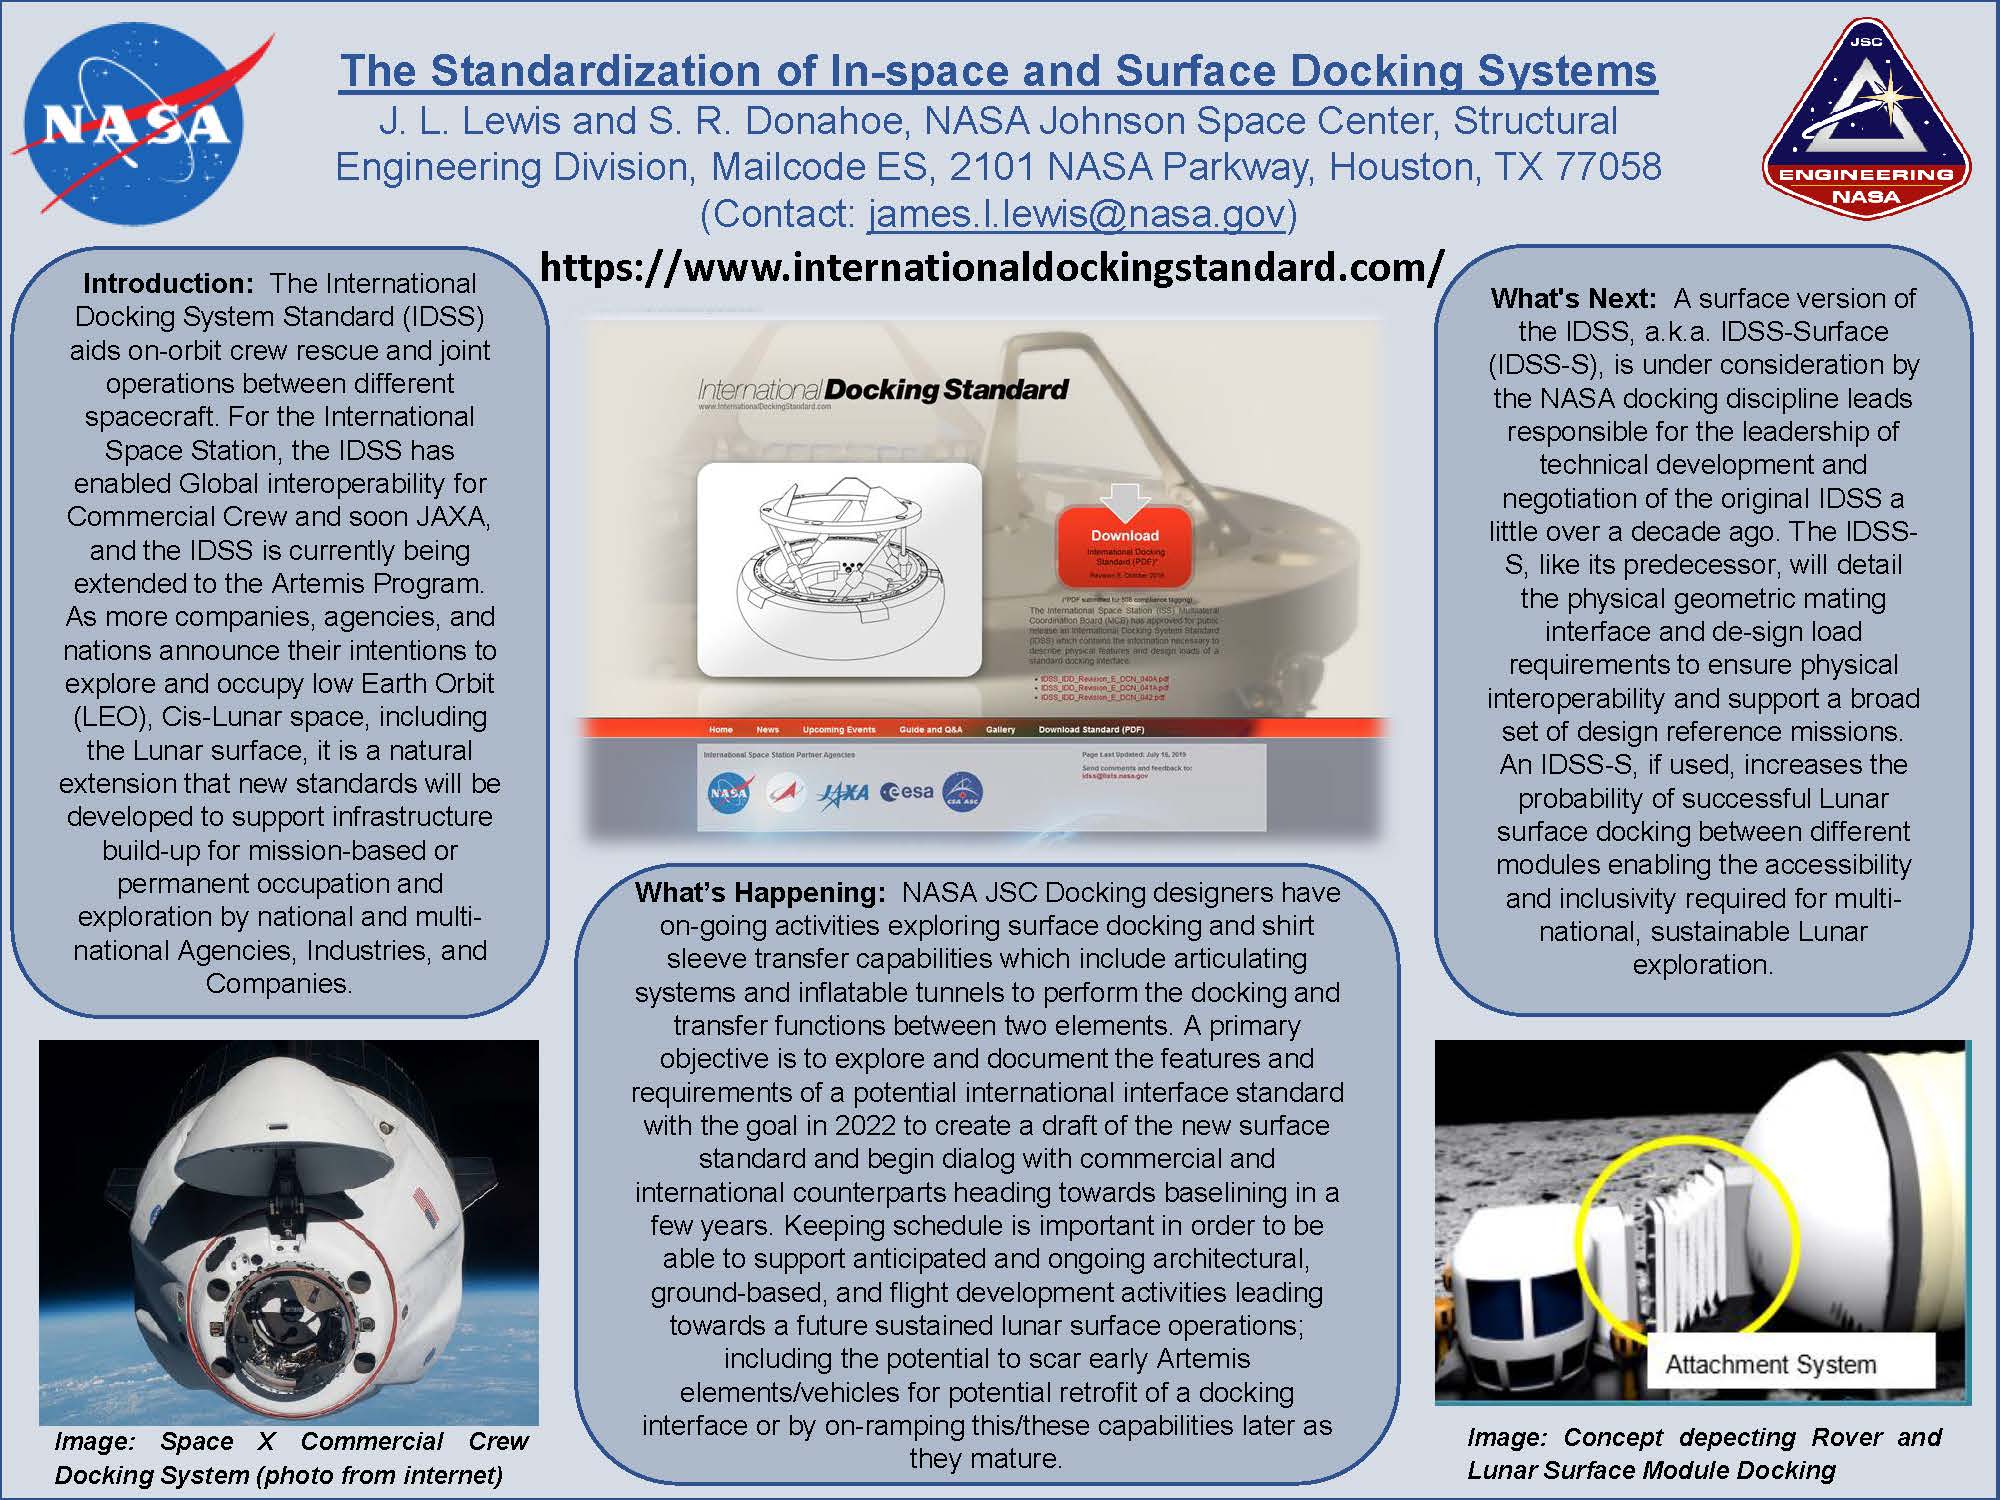 The Standardization of In-space and Surface Docking